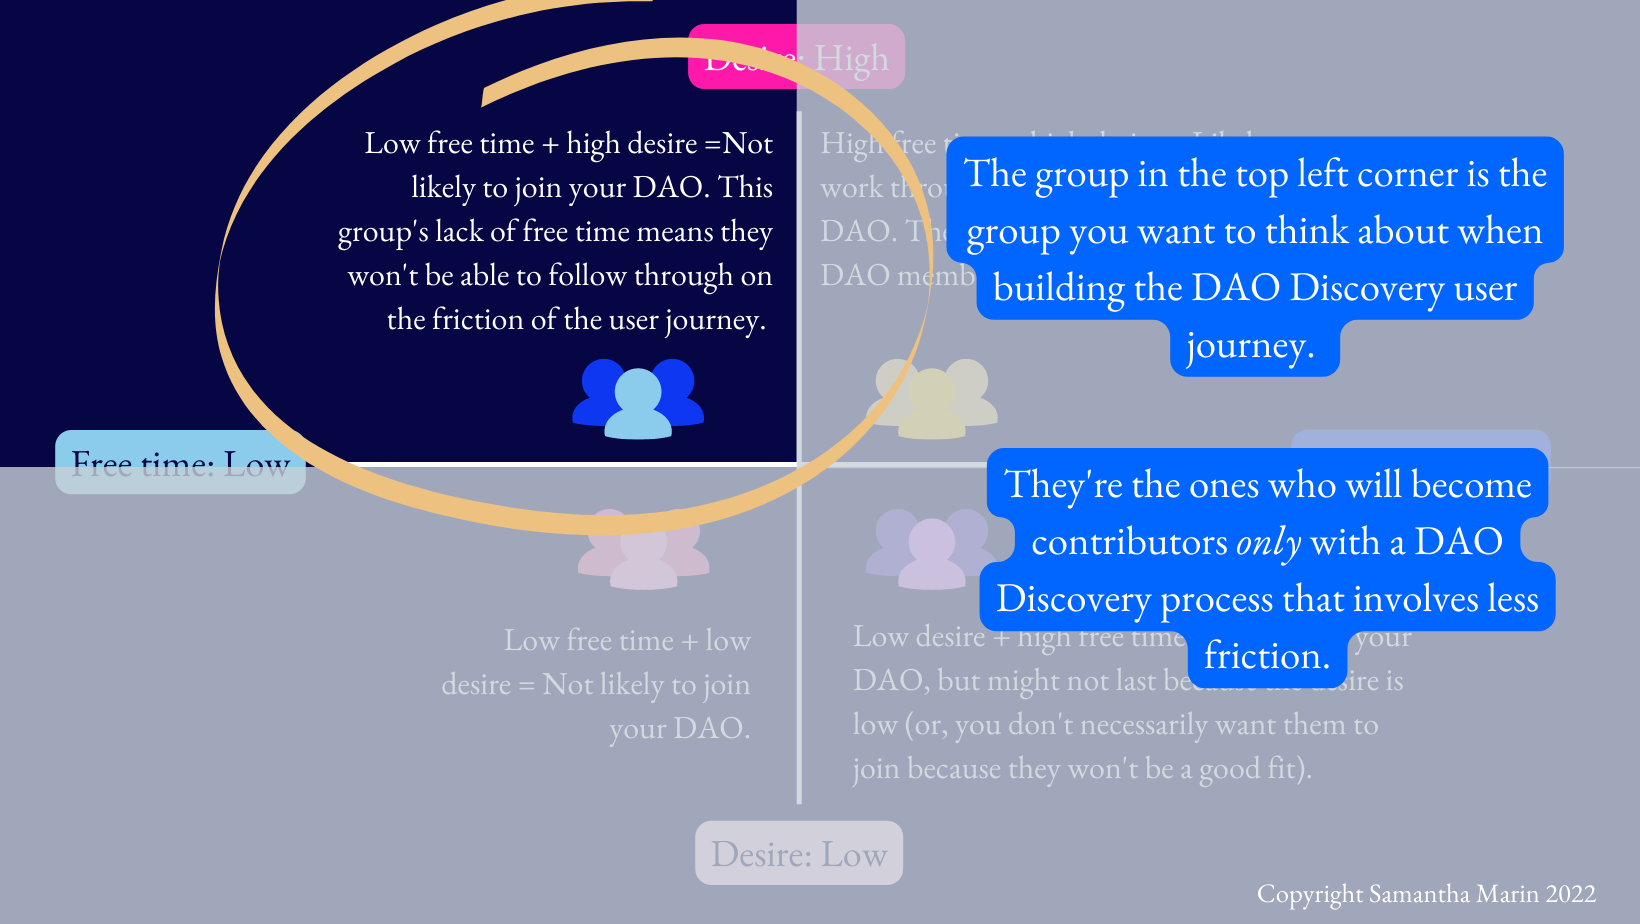 The group DAOs need to design user journeys for is the top left: low free time + high desire.